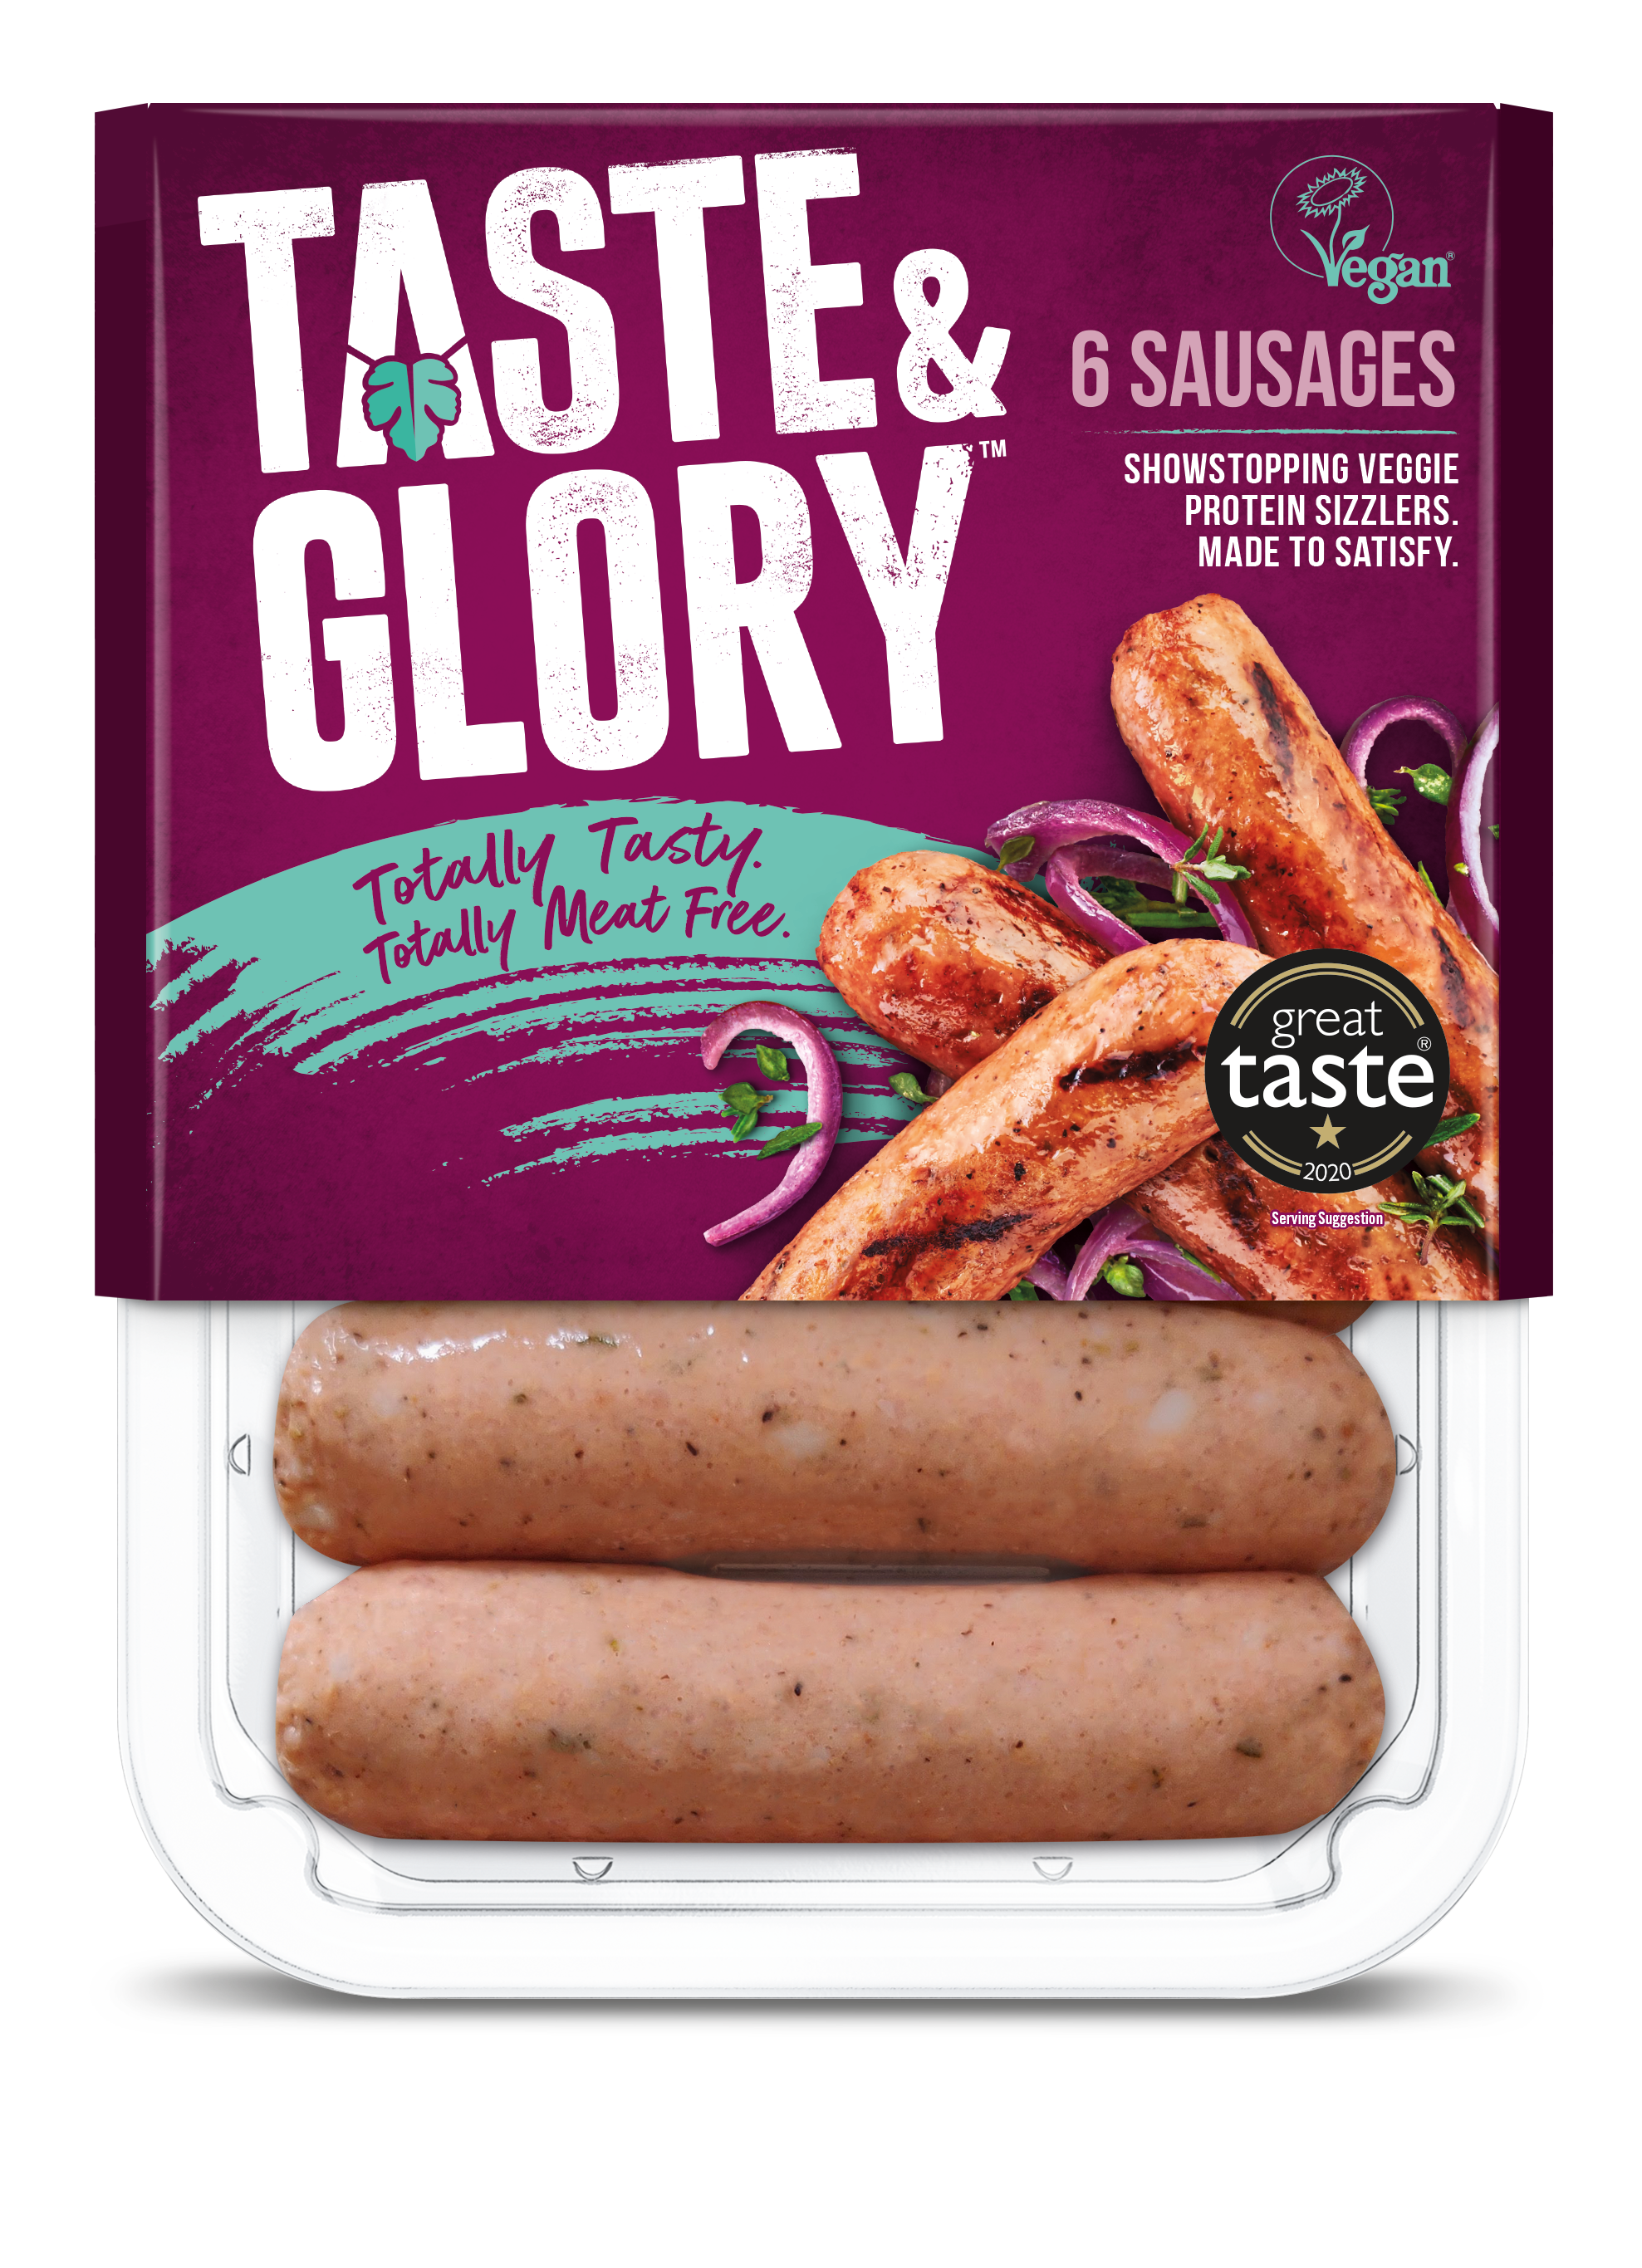 Naked Glory rebrands as Taste and Glory